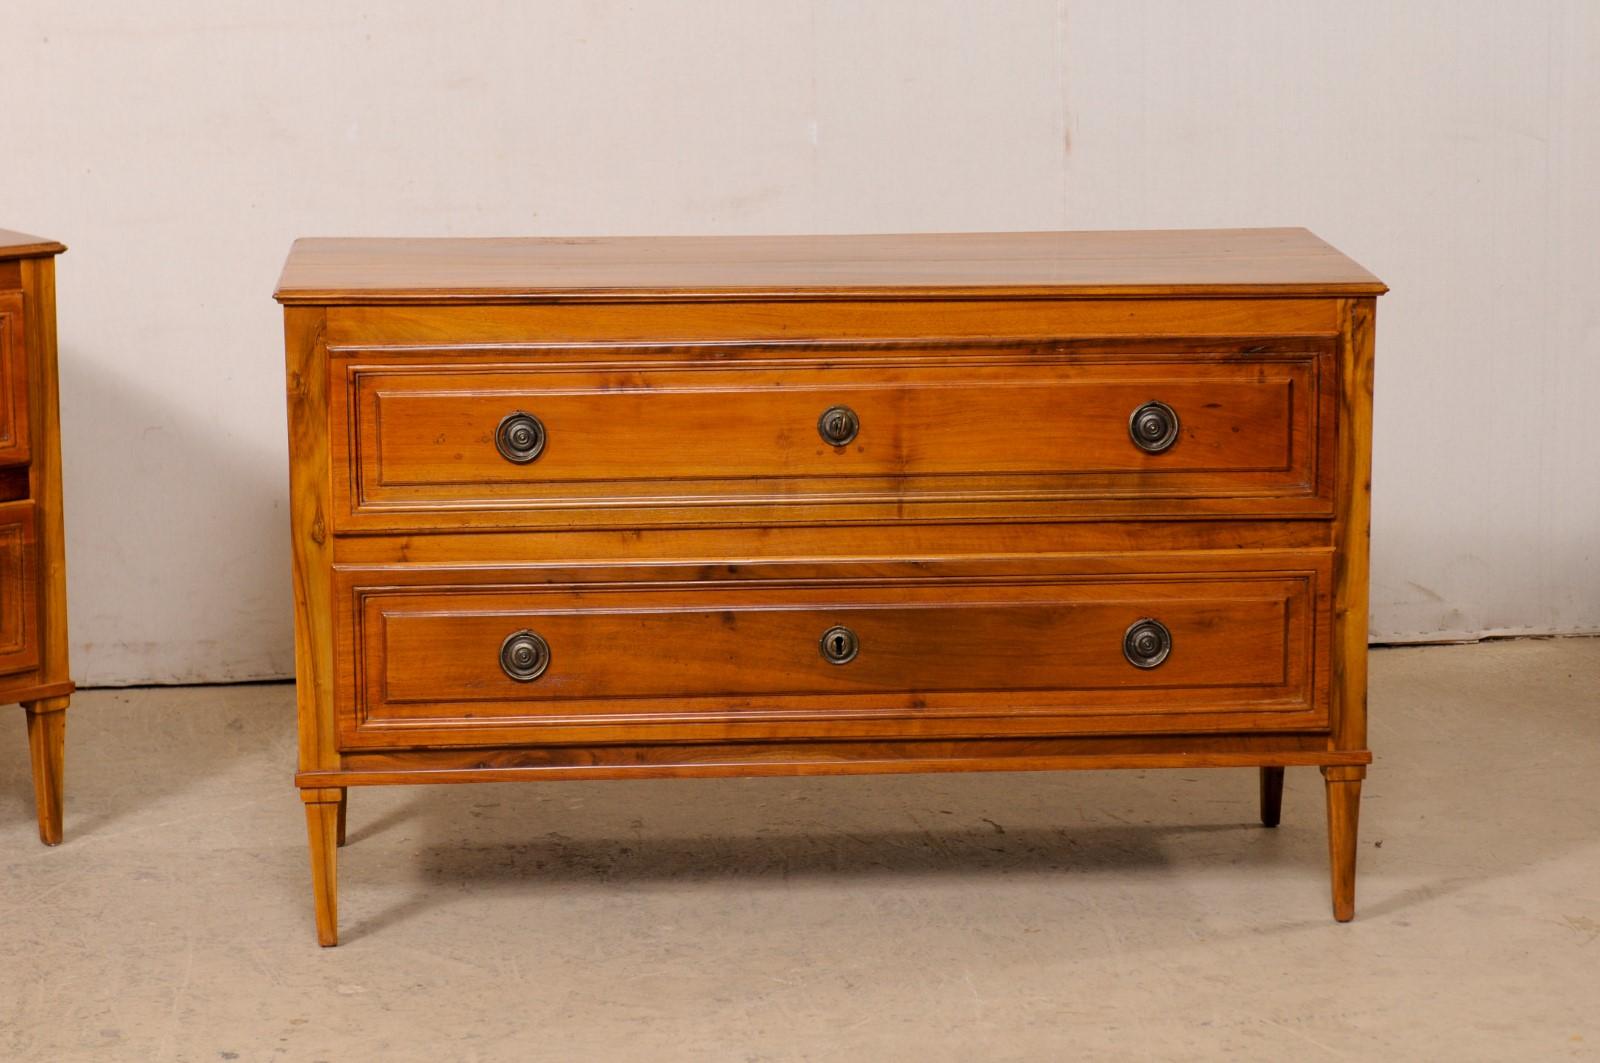 19th Century A Fabulous Pair of Italian Late 18th C. Two-Drawer Cassetteire, Over 4 Ft. Long For Sale